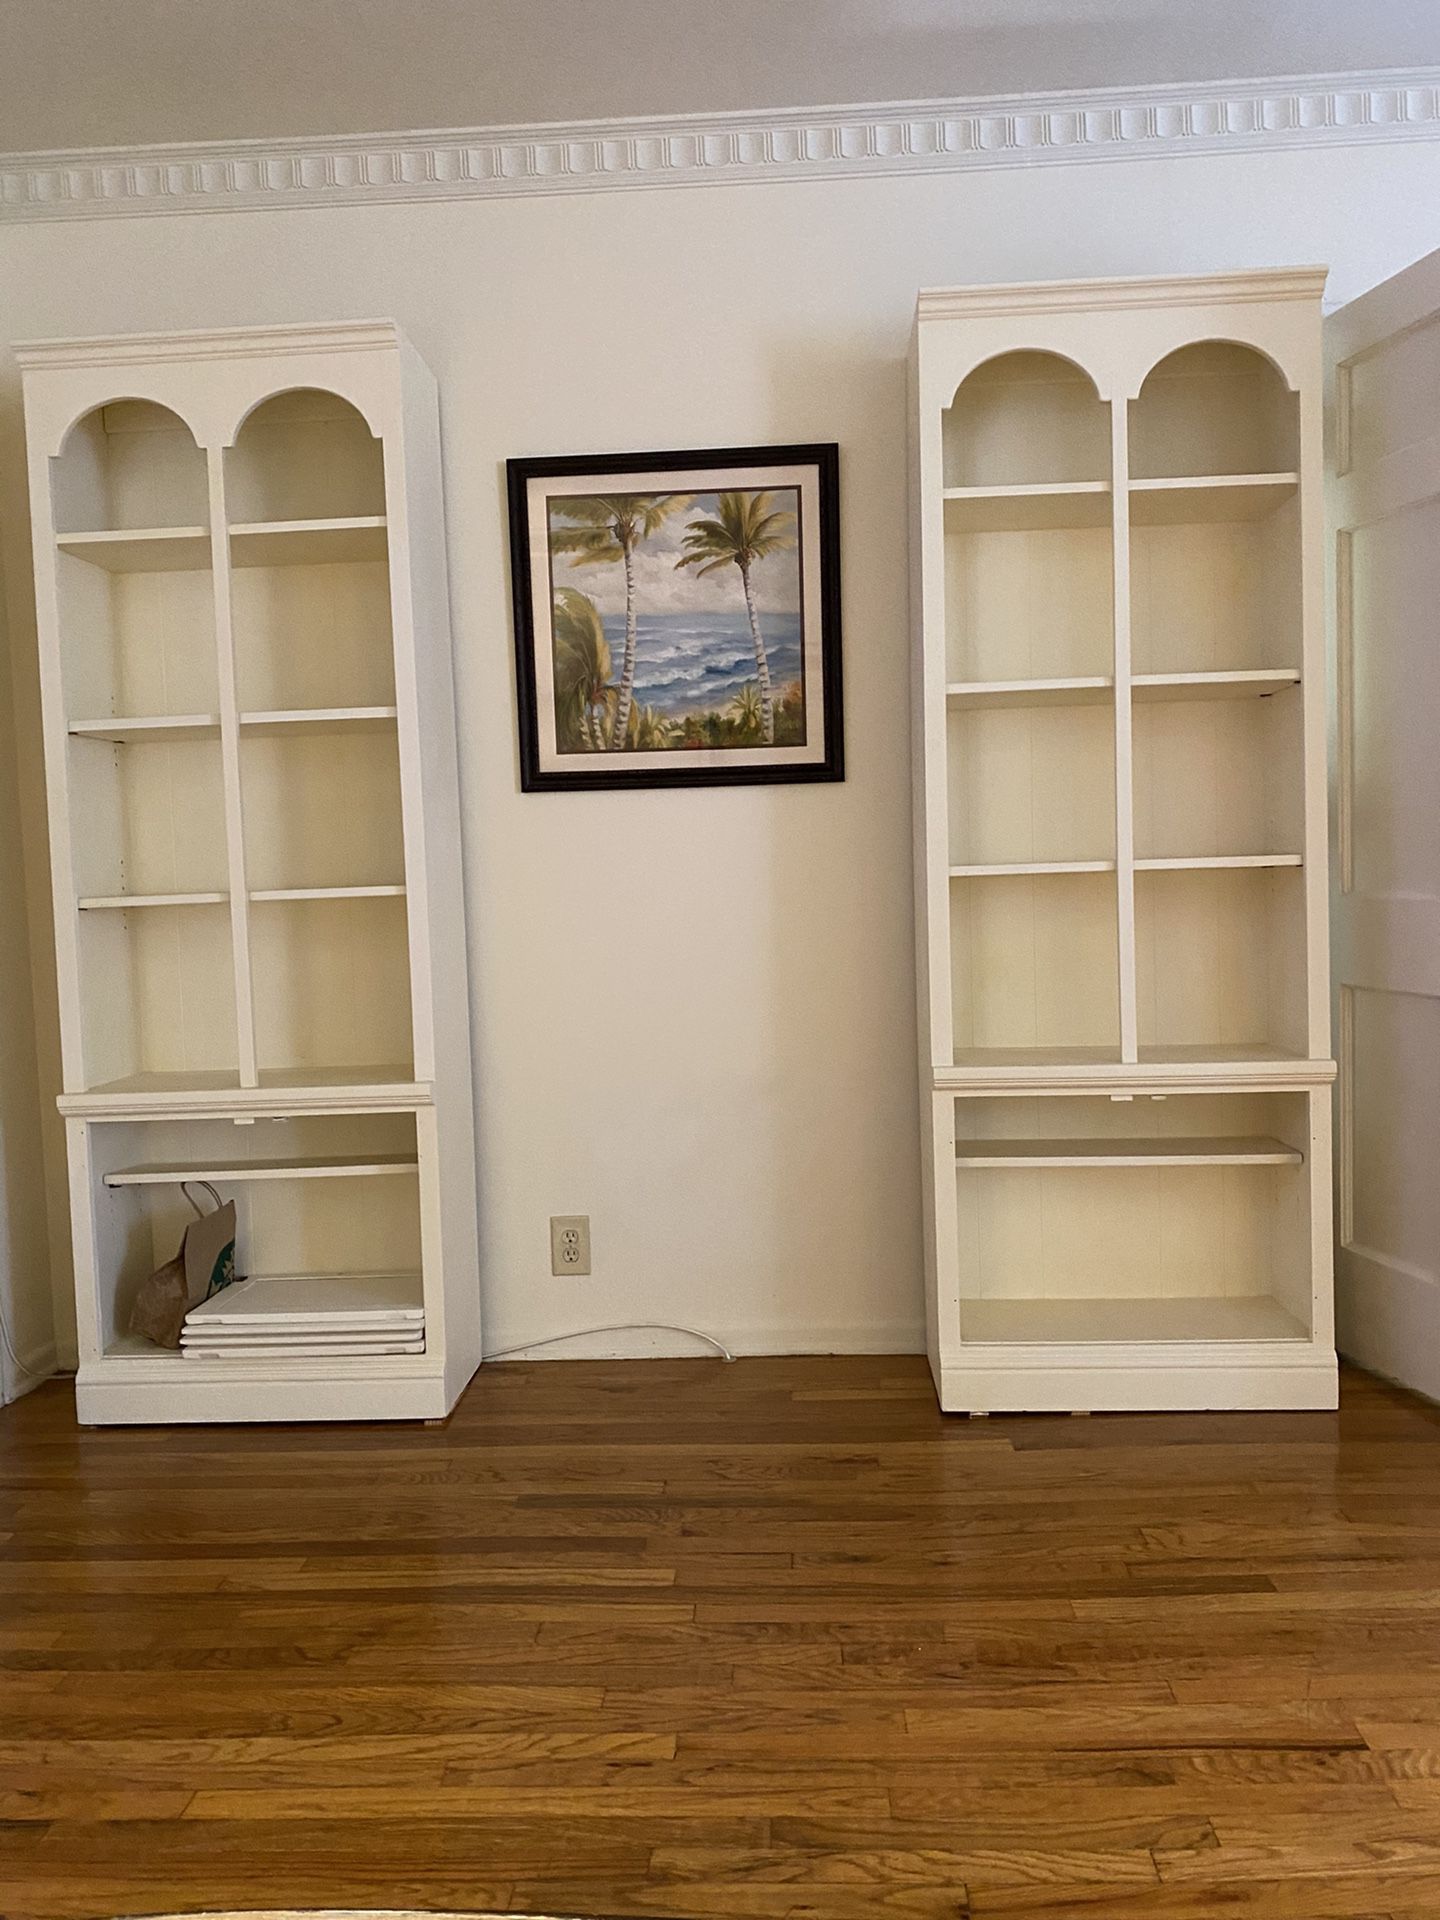 Free Bookcases. Have all hardware and doors for bottom shelves. MarVista location.